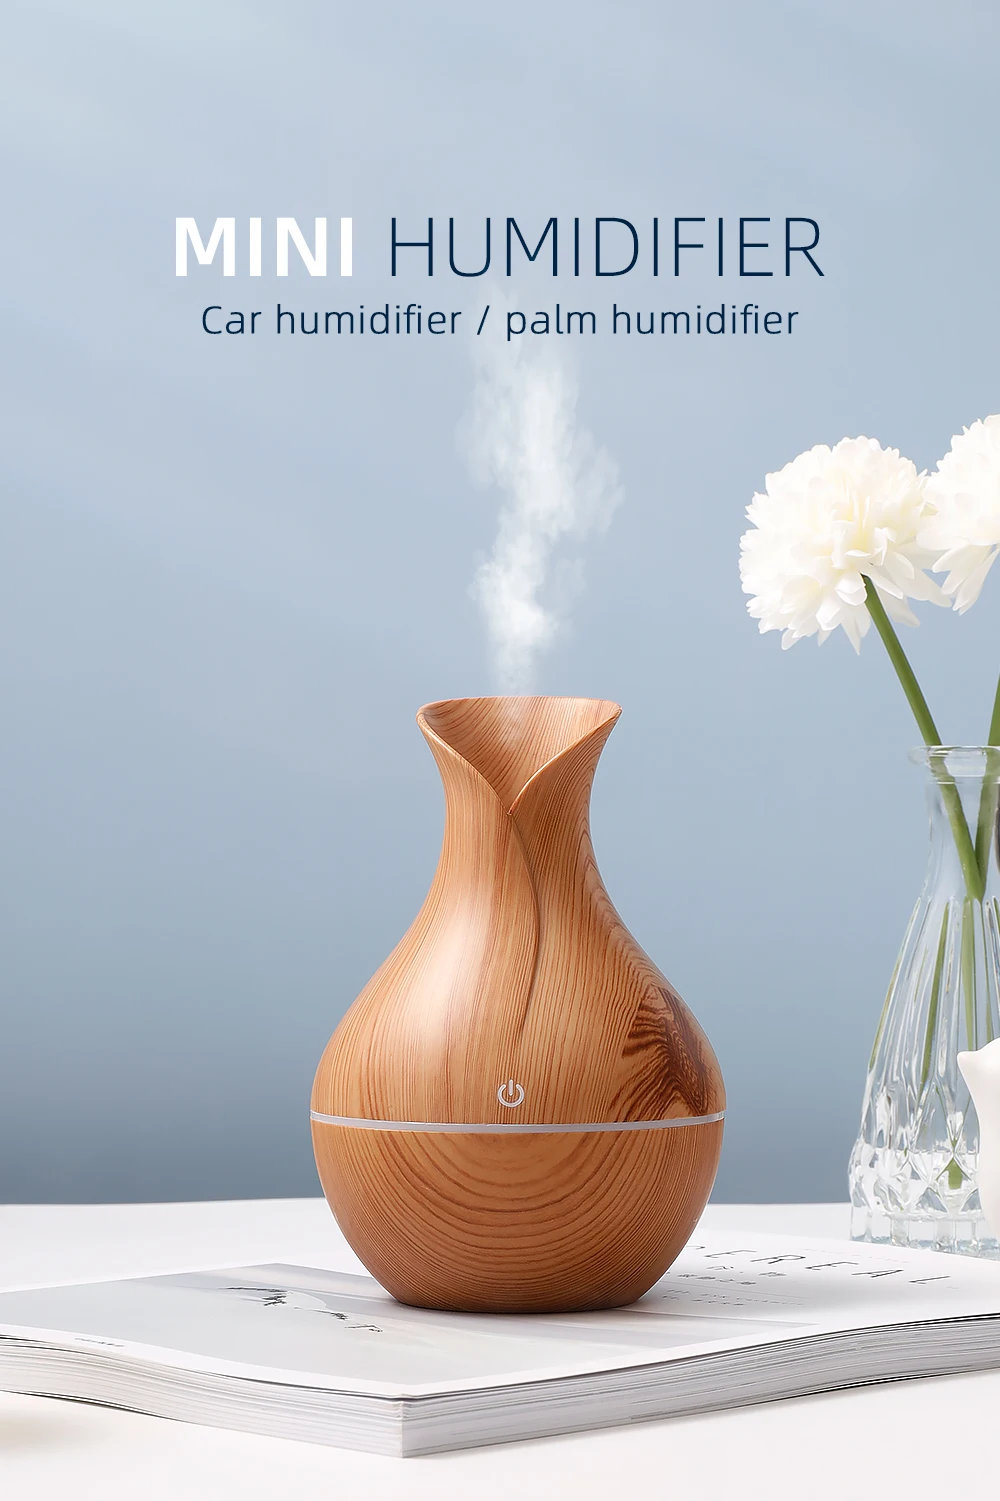 _silicon anti plant animal coconut oil solid wood big air dome air personal air fish tank 240ml flame private label humidifier.jpg